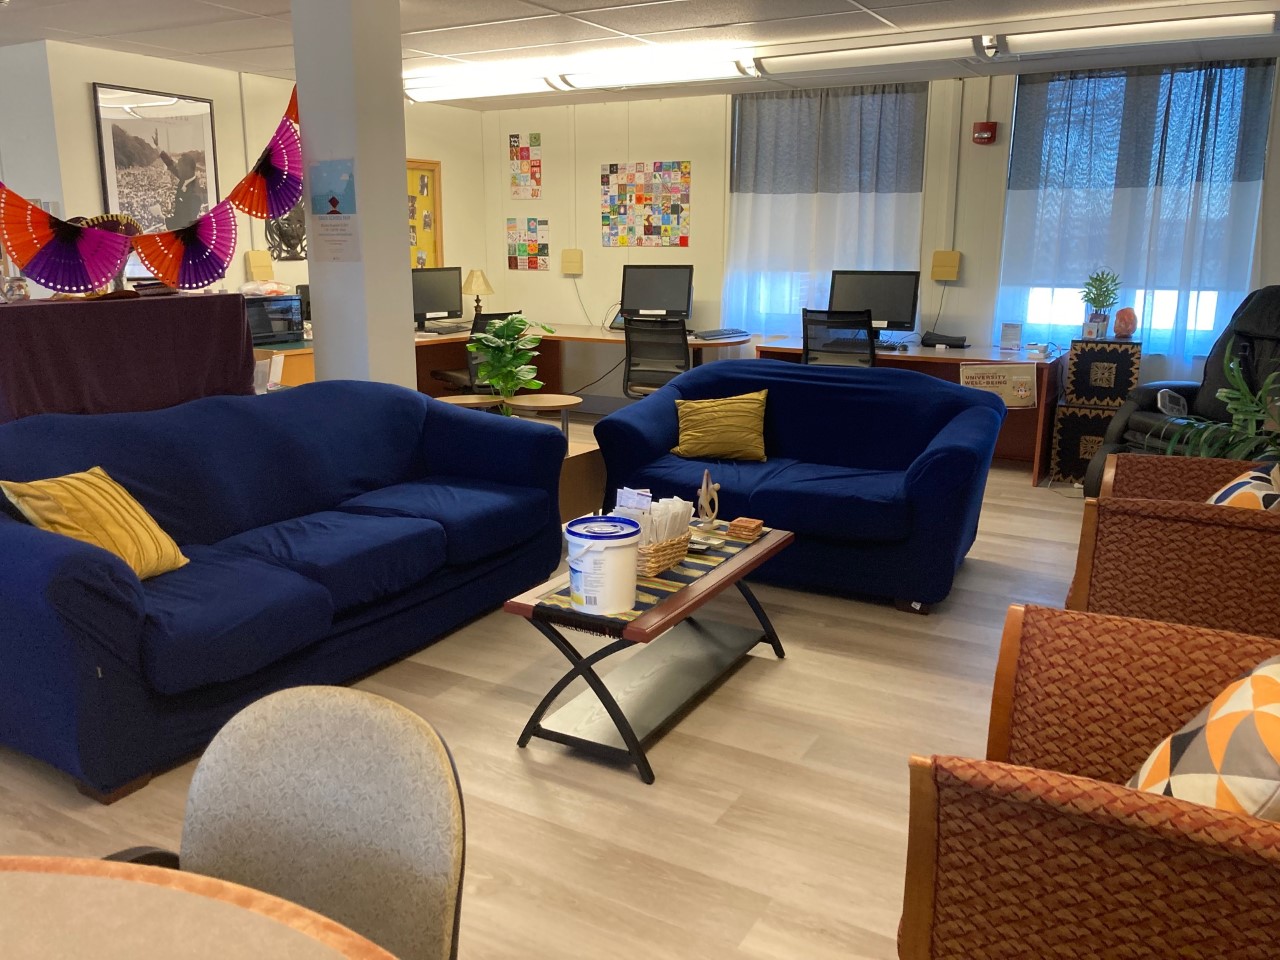  Interior of the resource room in the Multicultural Center featuring two blue couches 